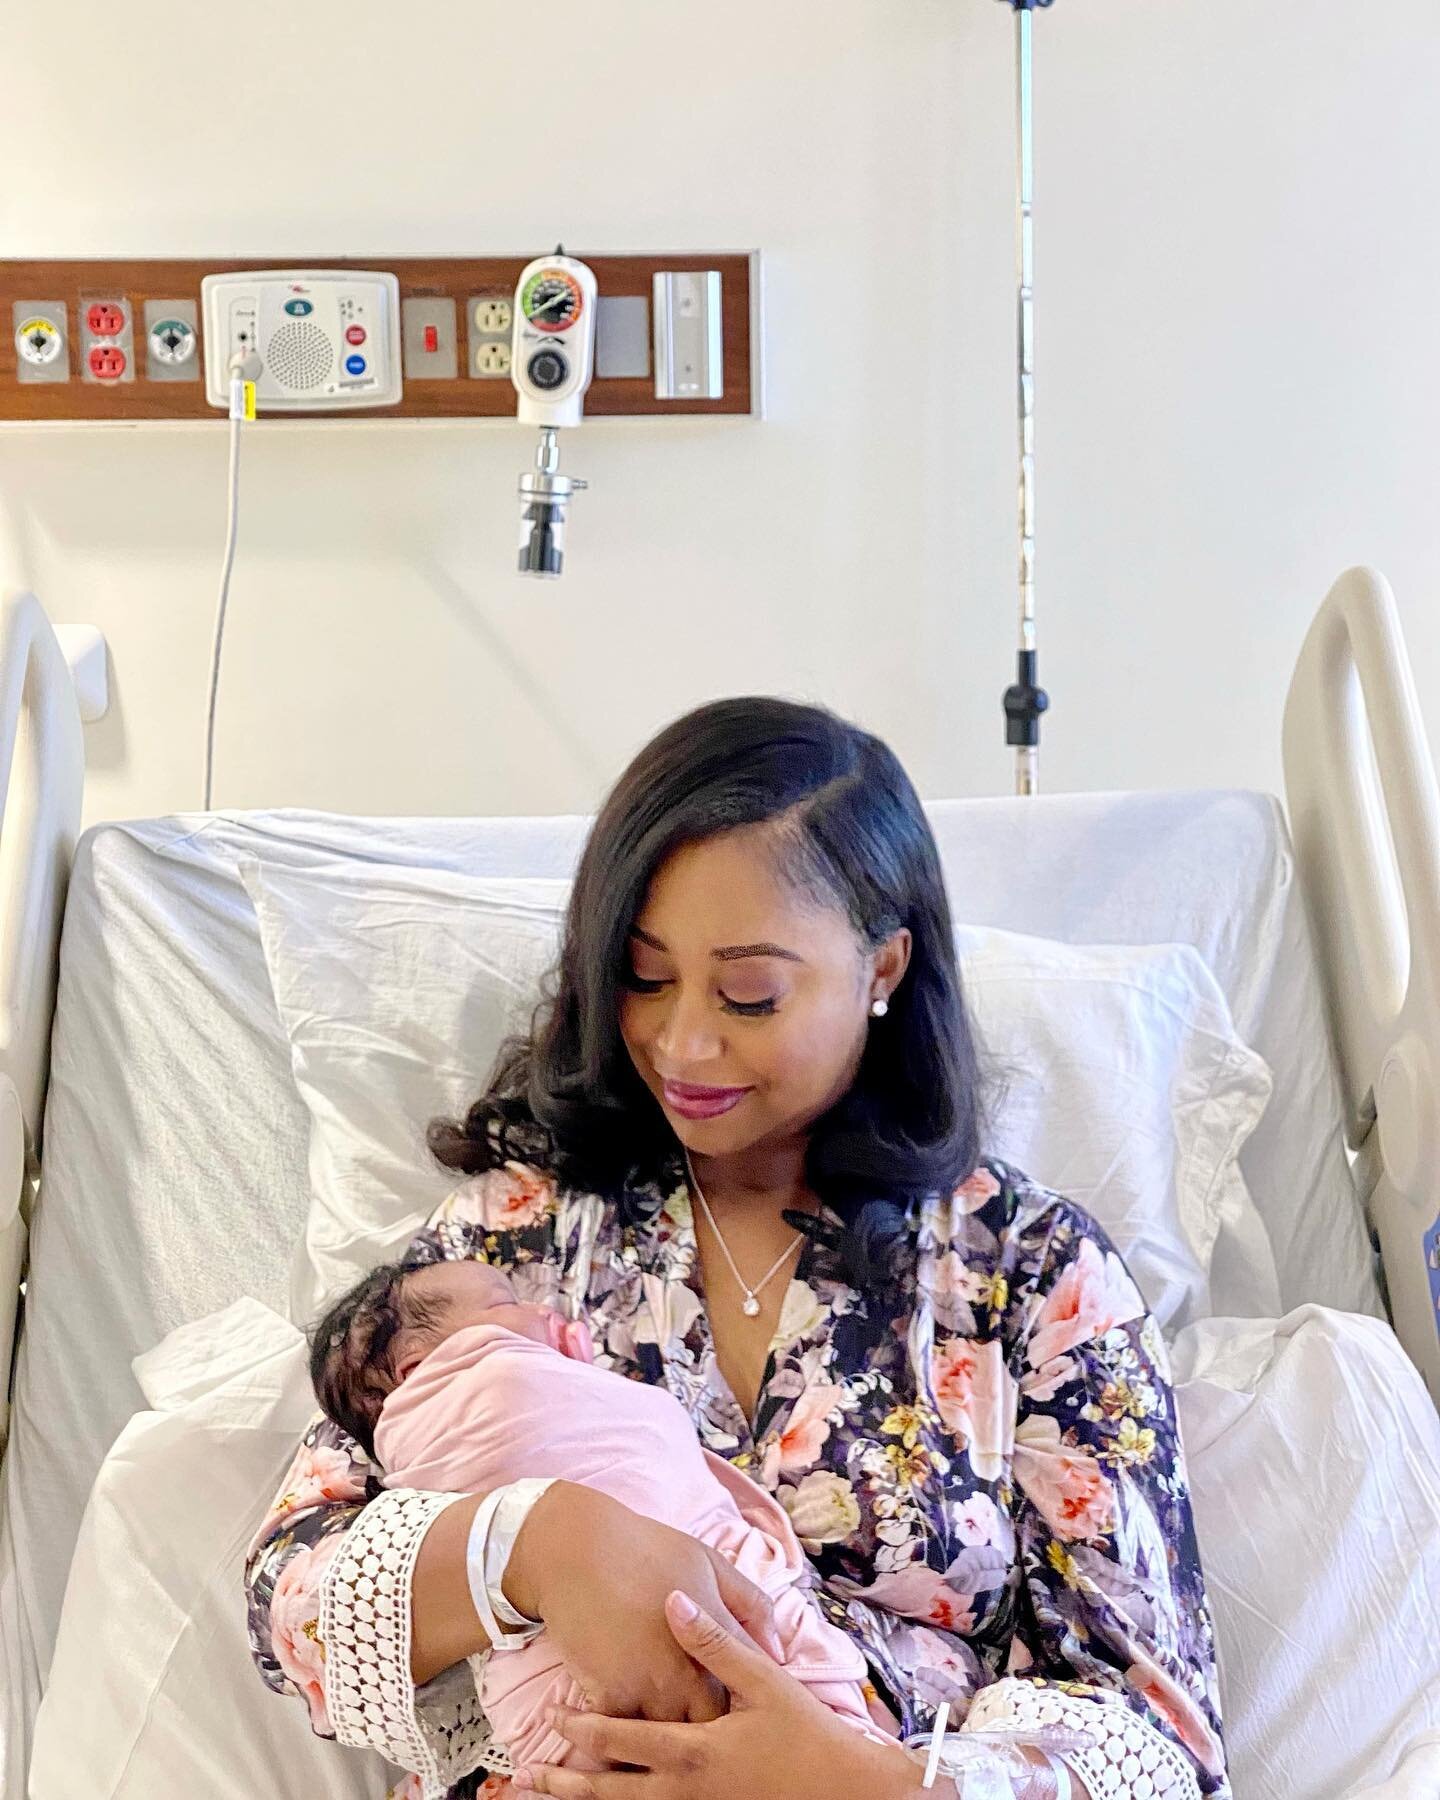 She&rsquo;s HERE  and finally in my arms😍💕 Arriving on her exact delivery date of February 23rd, 2023 we welcome our sweet and precious baby girl to Earth side. ⁣
⁣
The day of her birth will forever remain the best day of my life and I&rsquo;ll nev